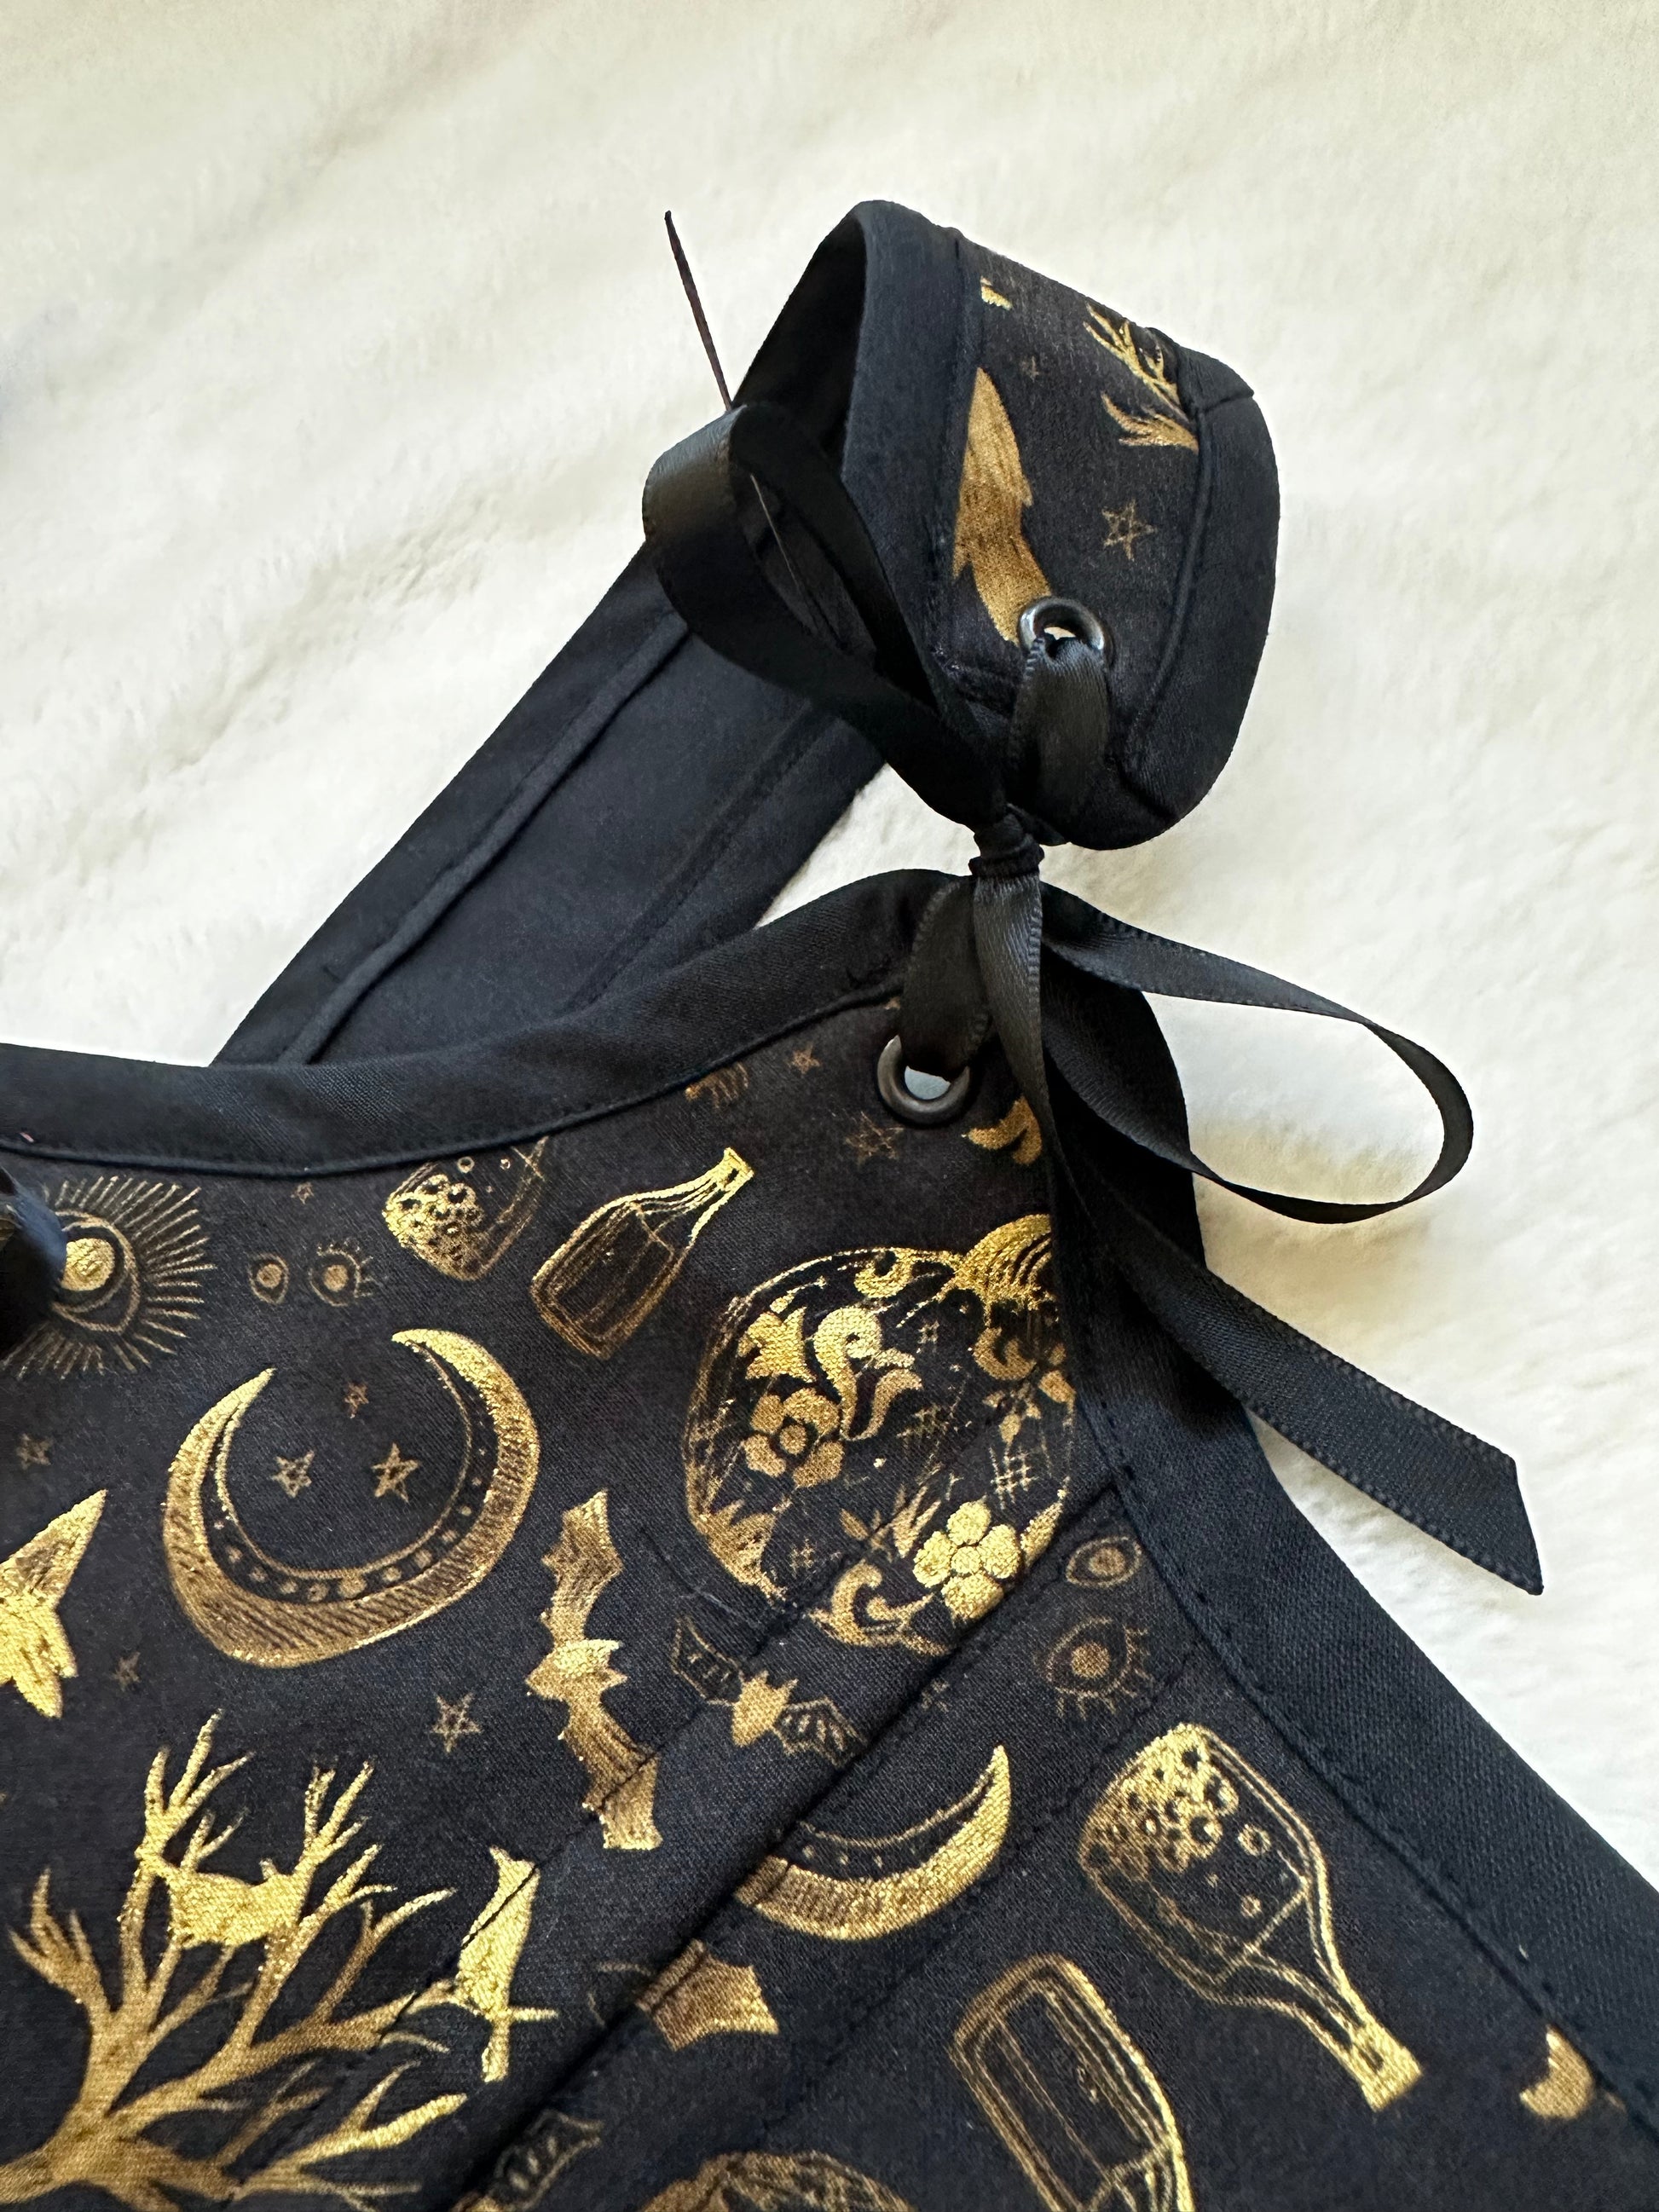 Top right strap and front of renaissance bodice in black fabric with gold patterned print. Pattern contains trees, moons, bottles, and bats in gold. Strap is tied to bodice with black ribbon. Bodice is on a white fuzzy blanket.